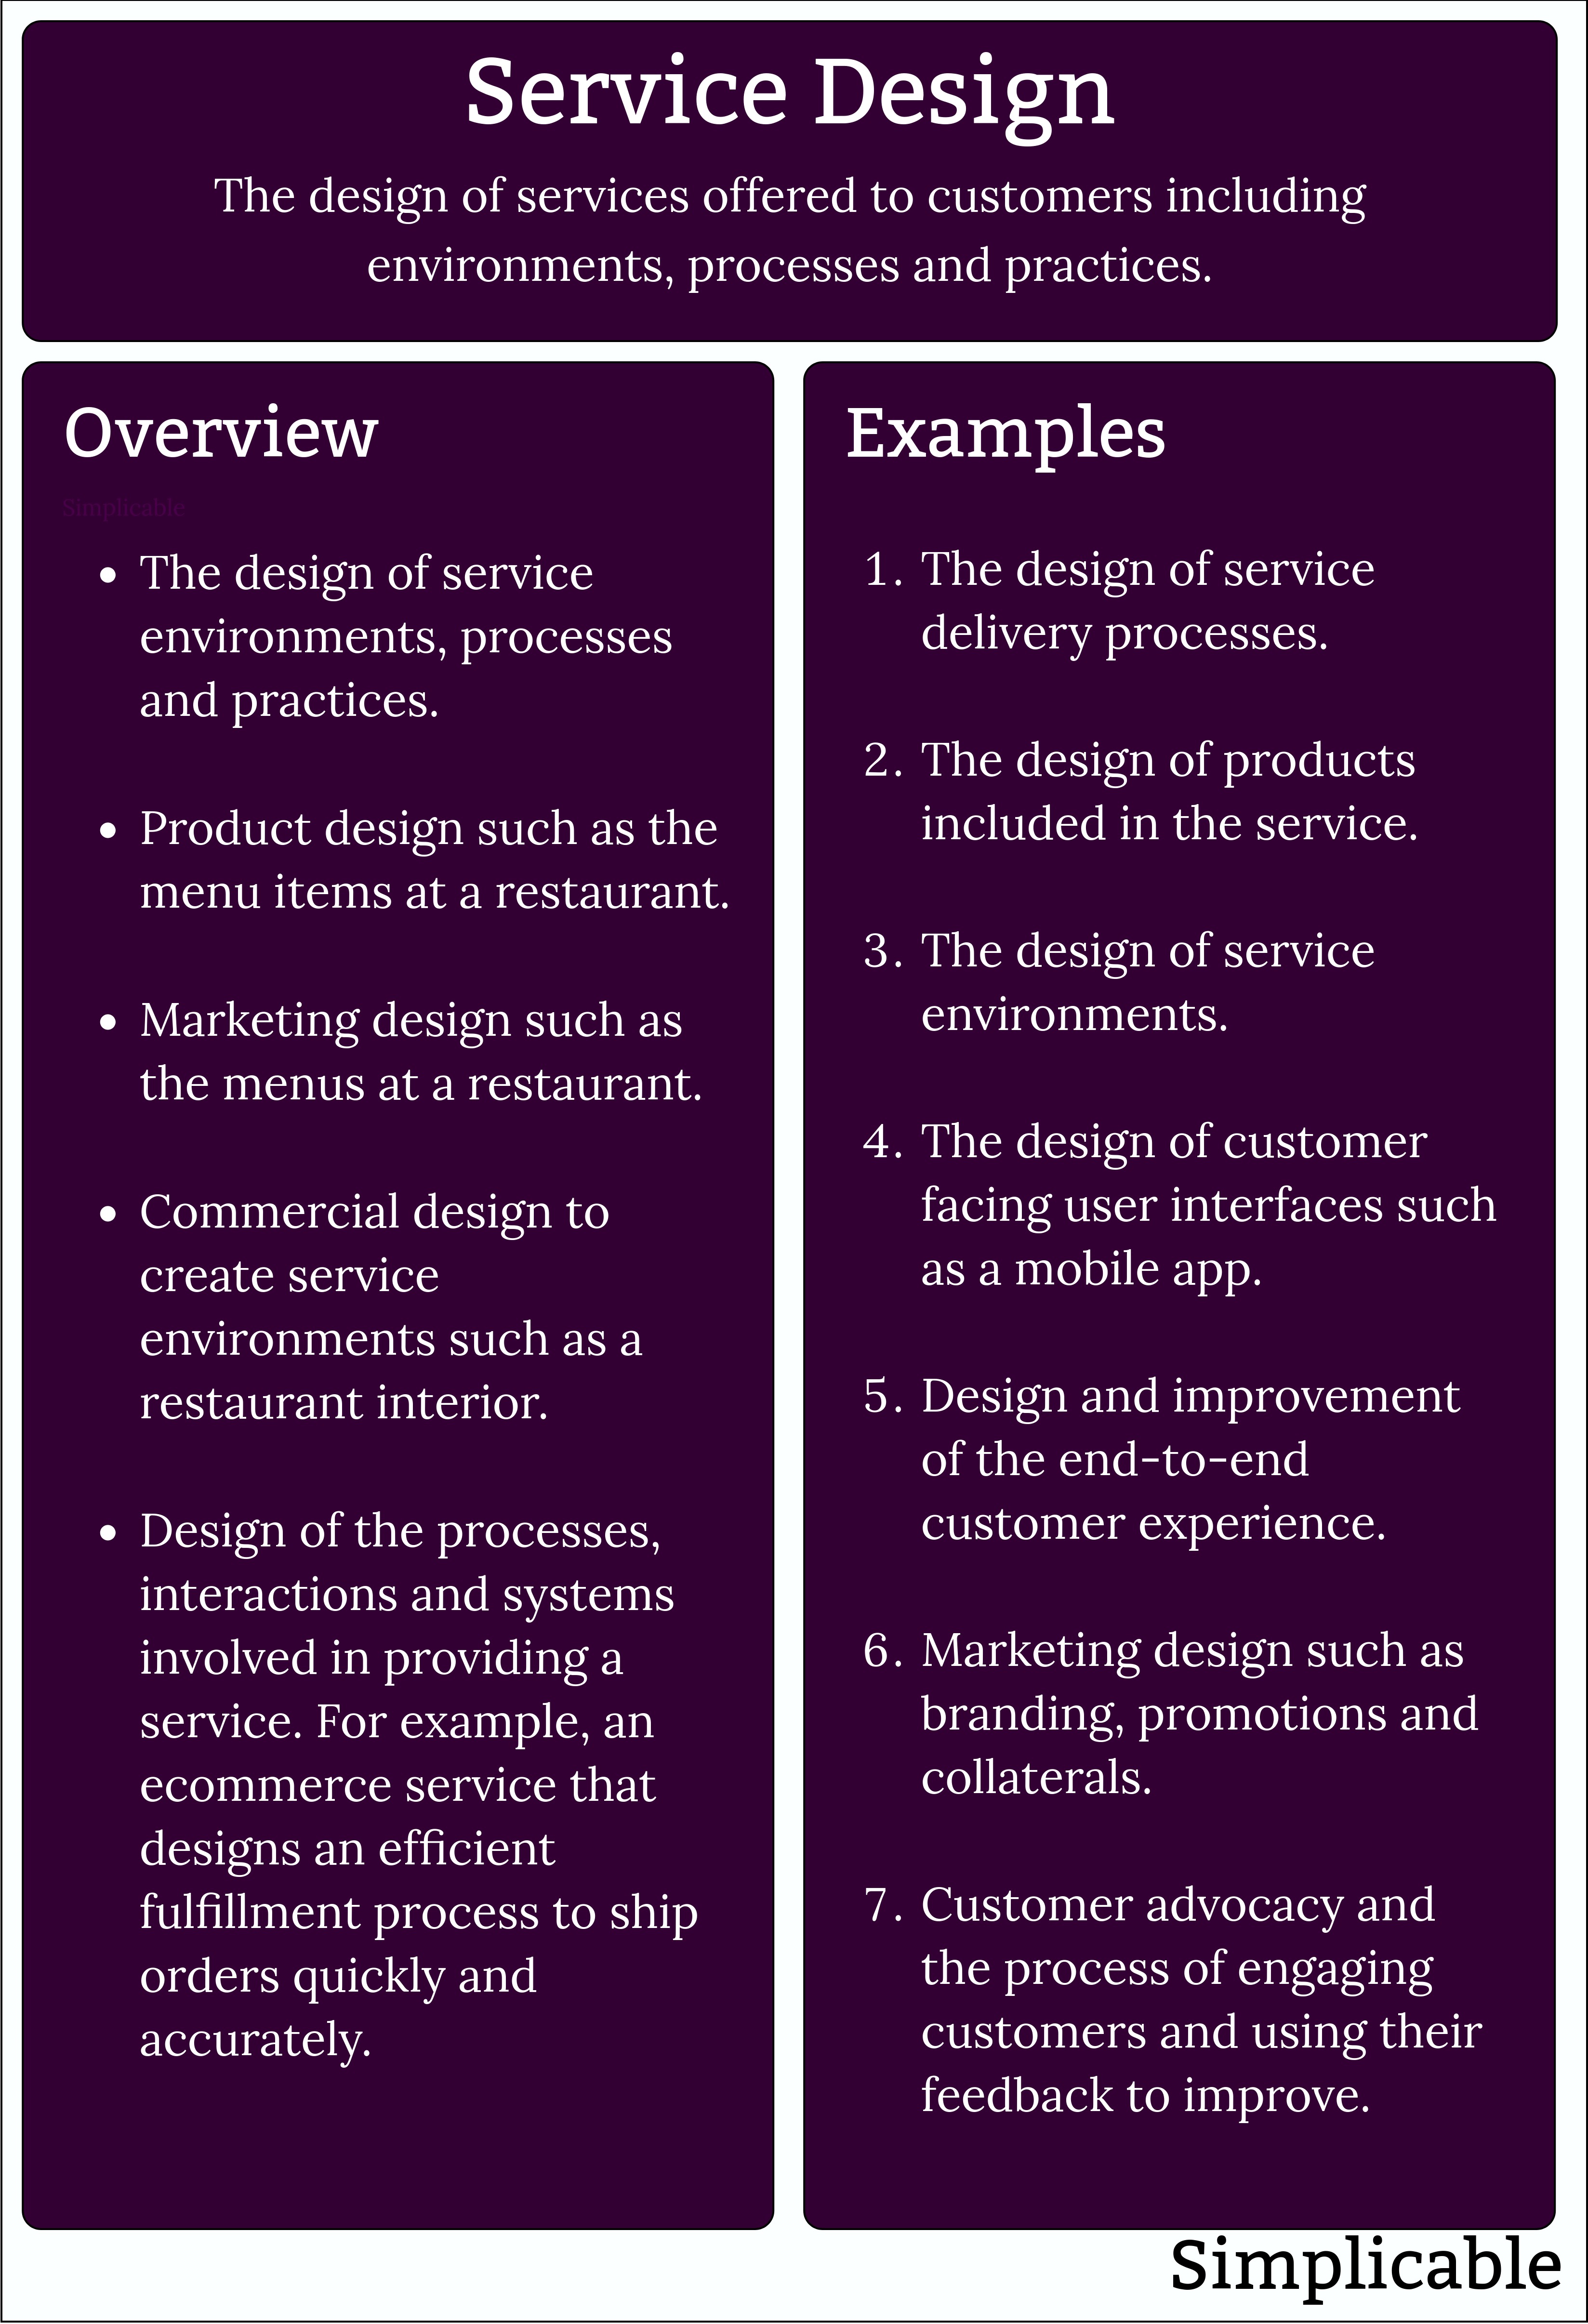 service design overview and examples